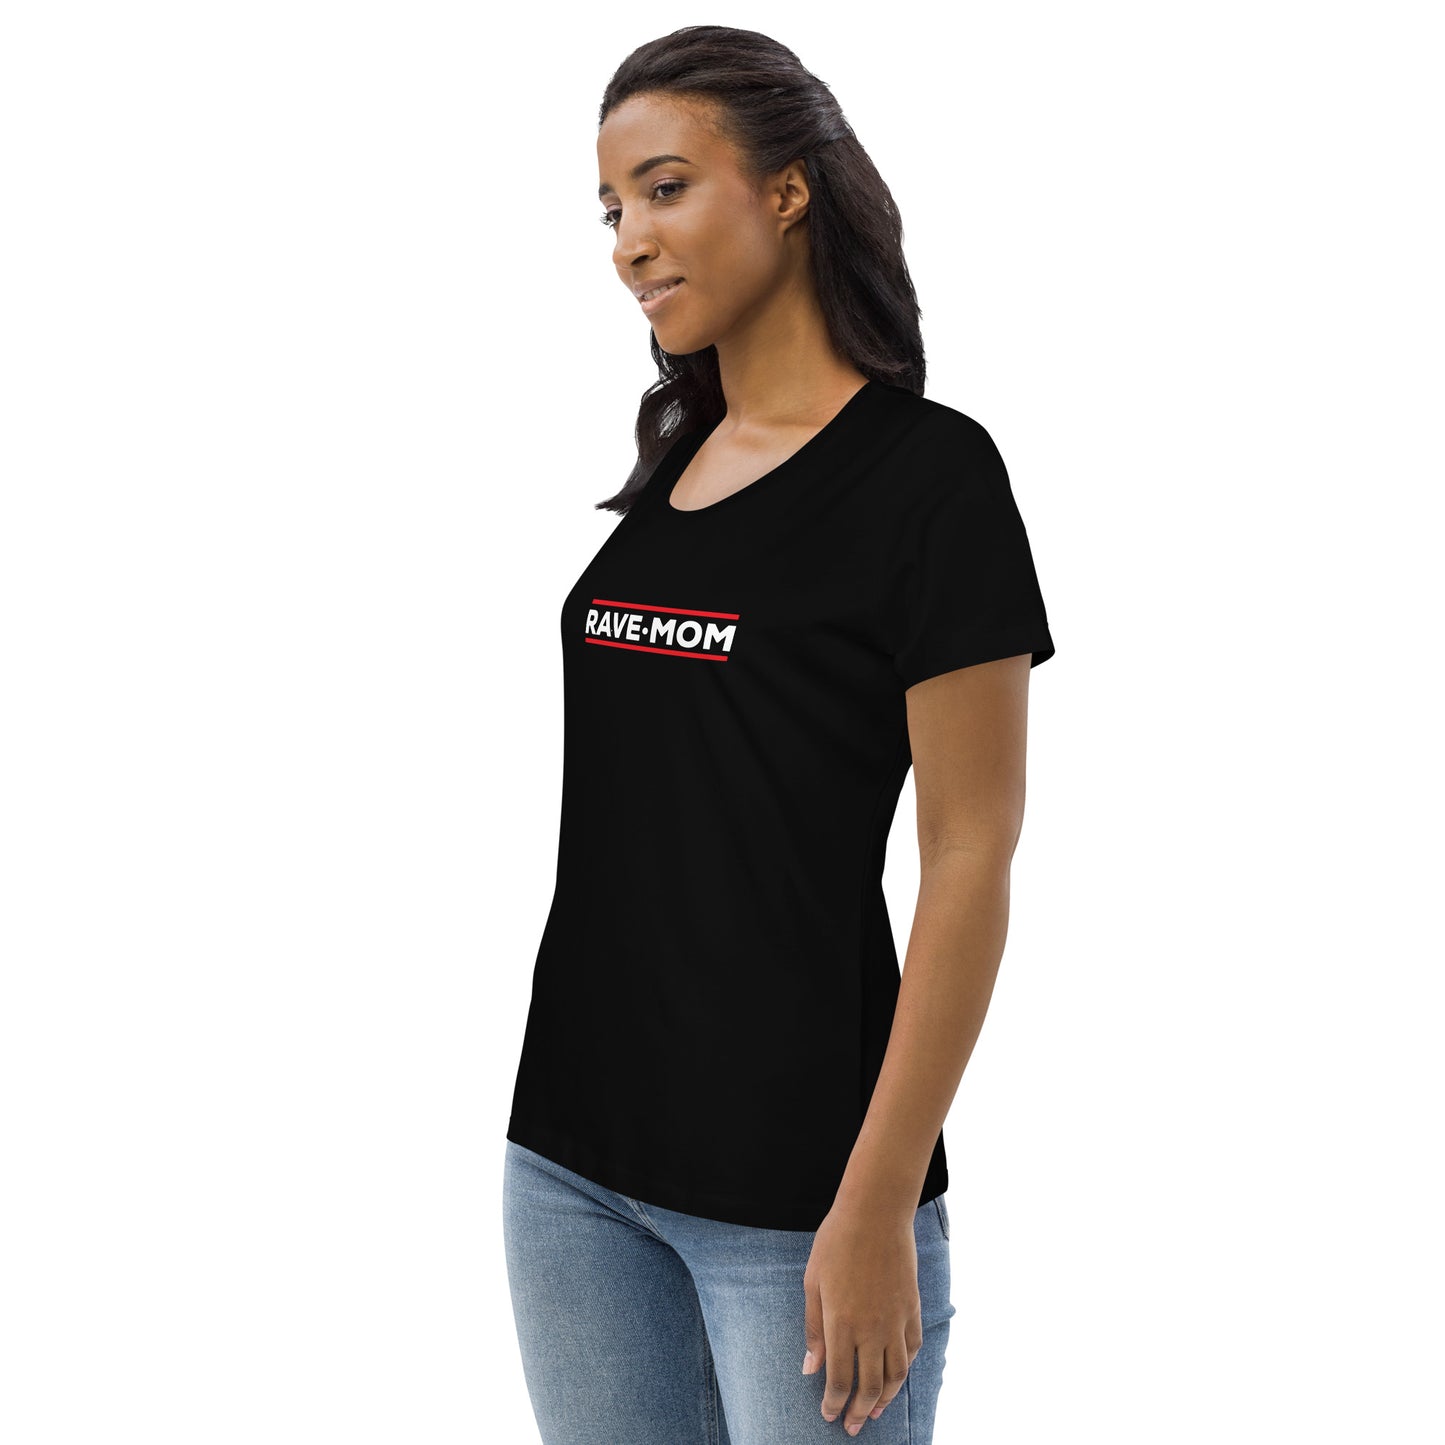 Rave Mom - Women's Fitted T-Shirt